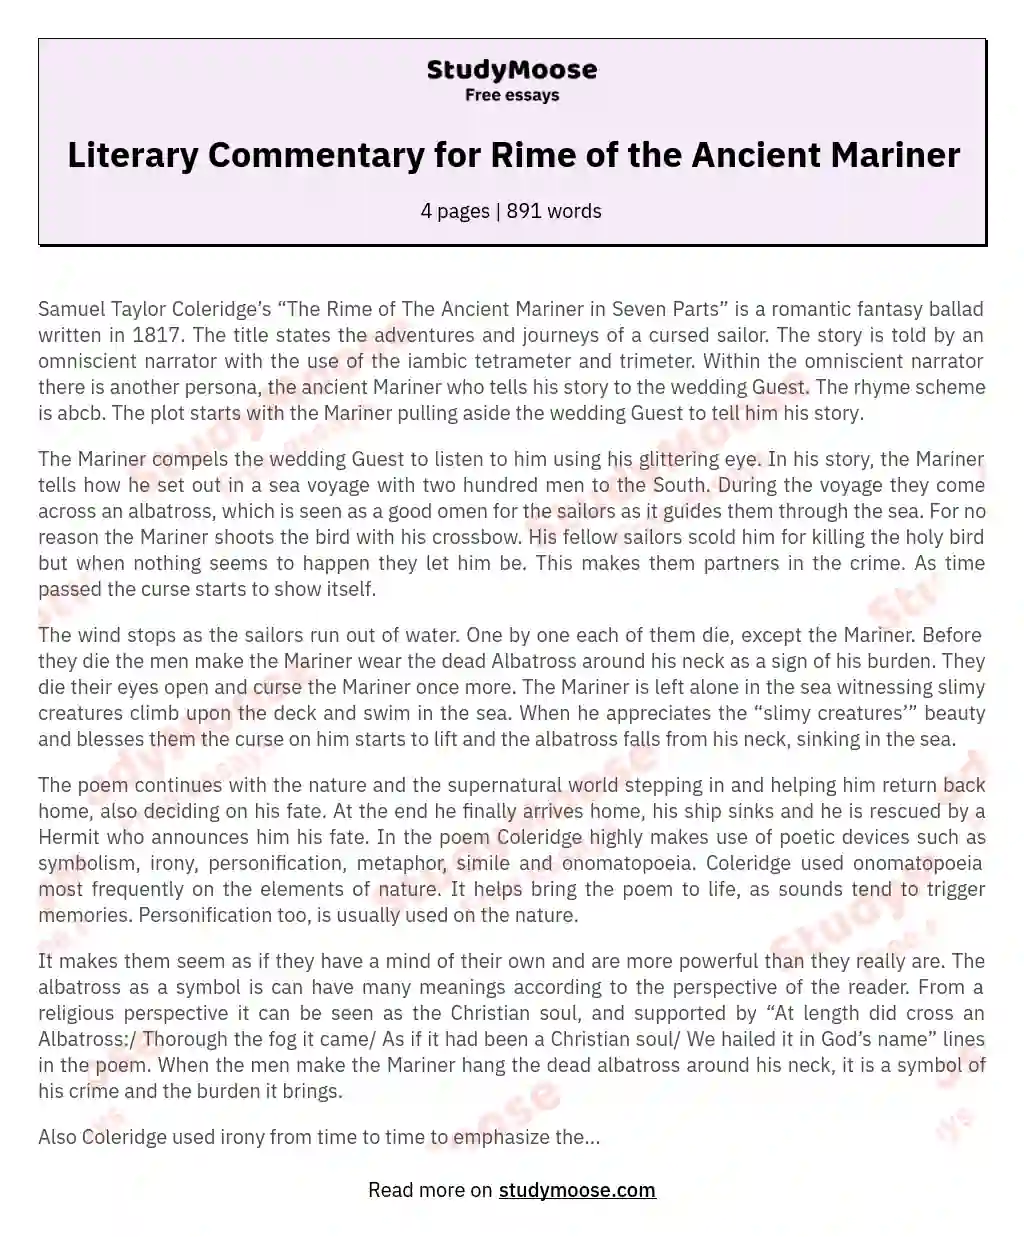 Literary Commentary for Rime of the Ancient Mariner